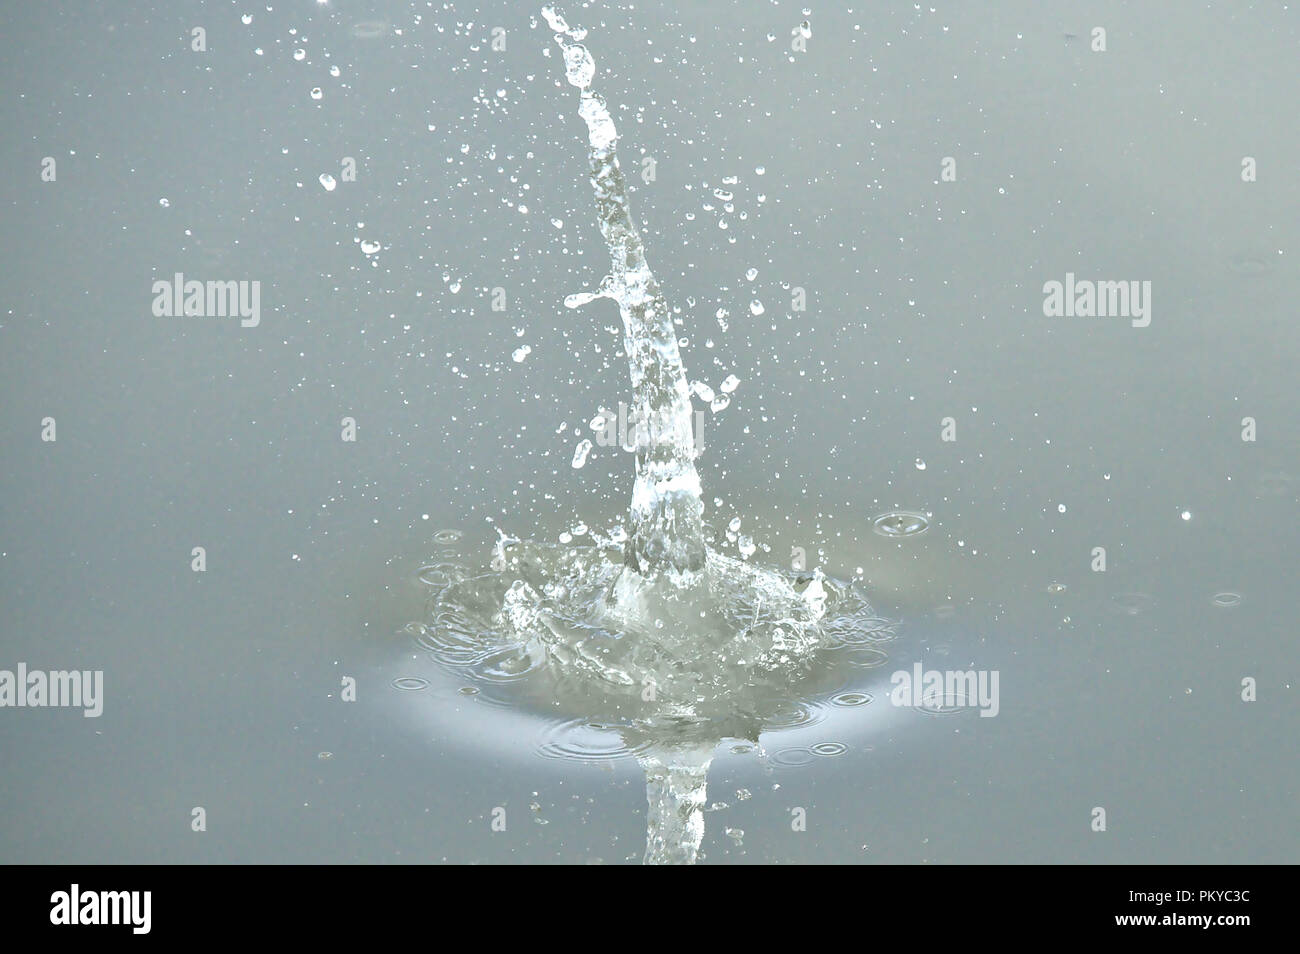 Splash from small stone dropped into the water. Stock Photo